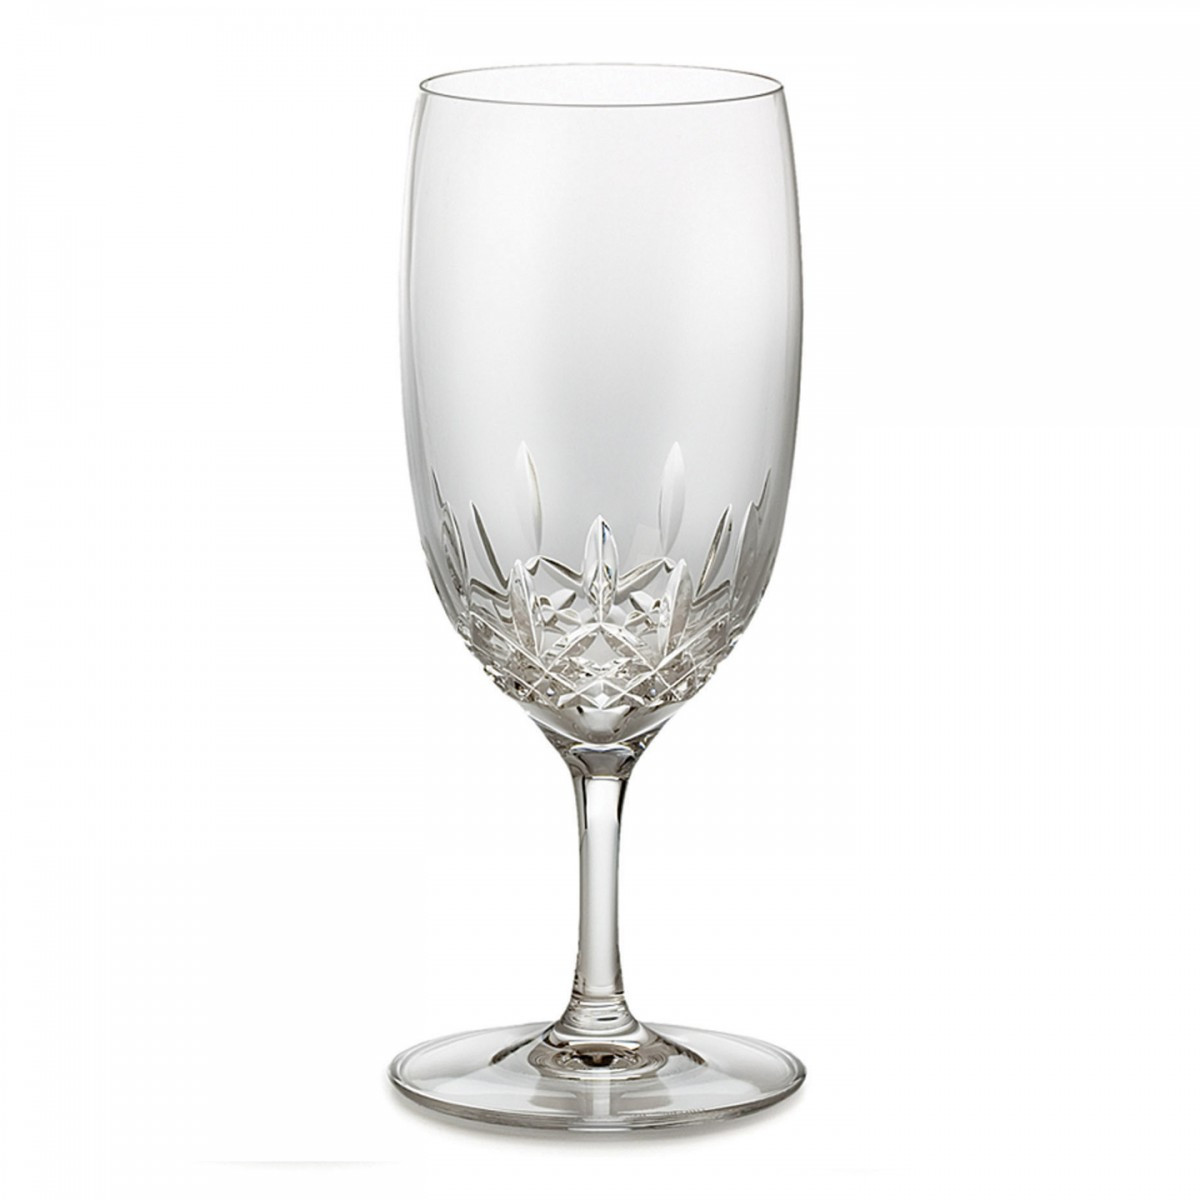 27 Trendy Waterford Giftology Lismore Candy Bud Vase 2024 free download waterford giftology lismore candy bud vase of easter collection in waterford crystal lismore essence water glass 19 oz